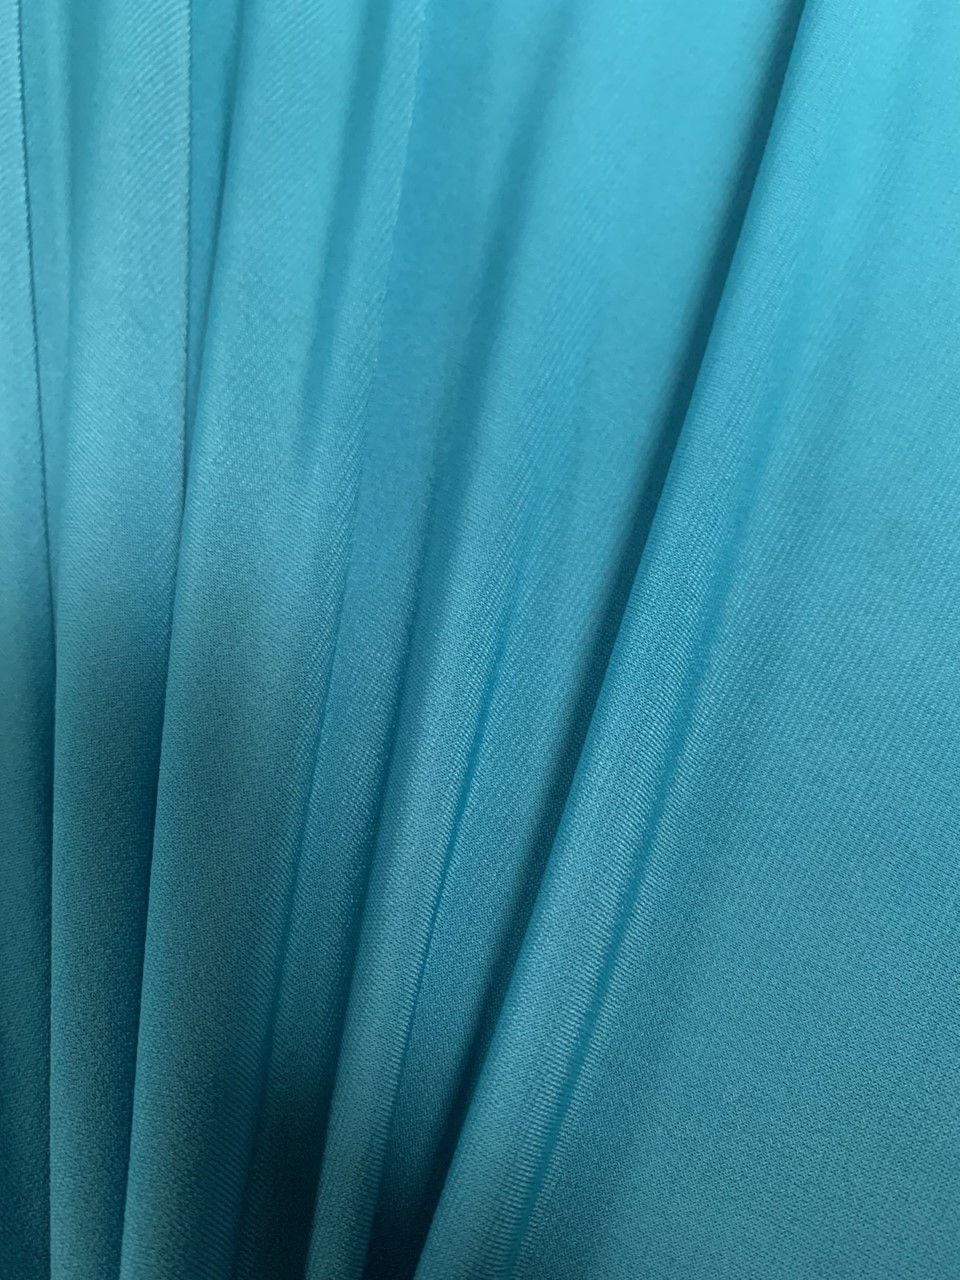 58/60" Turquoise ITY Knit Jersey Fabric By The Yard